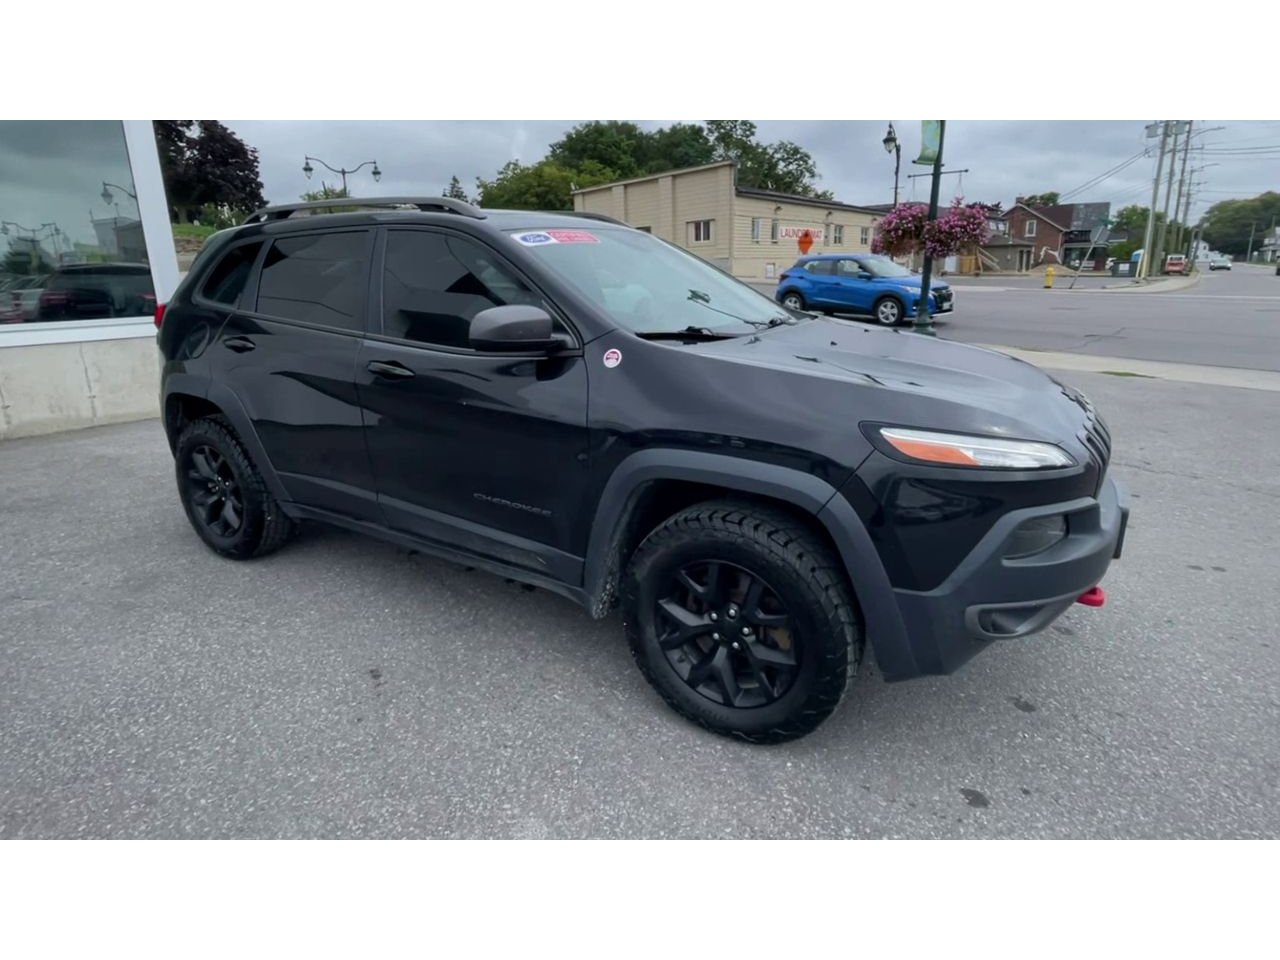 2016 Jeep Cherokee Trailhawk - P21241A Mobile Image 1